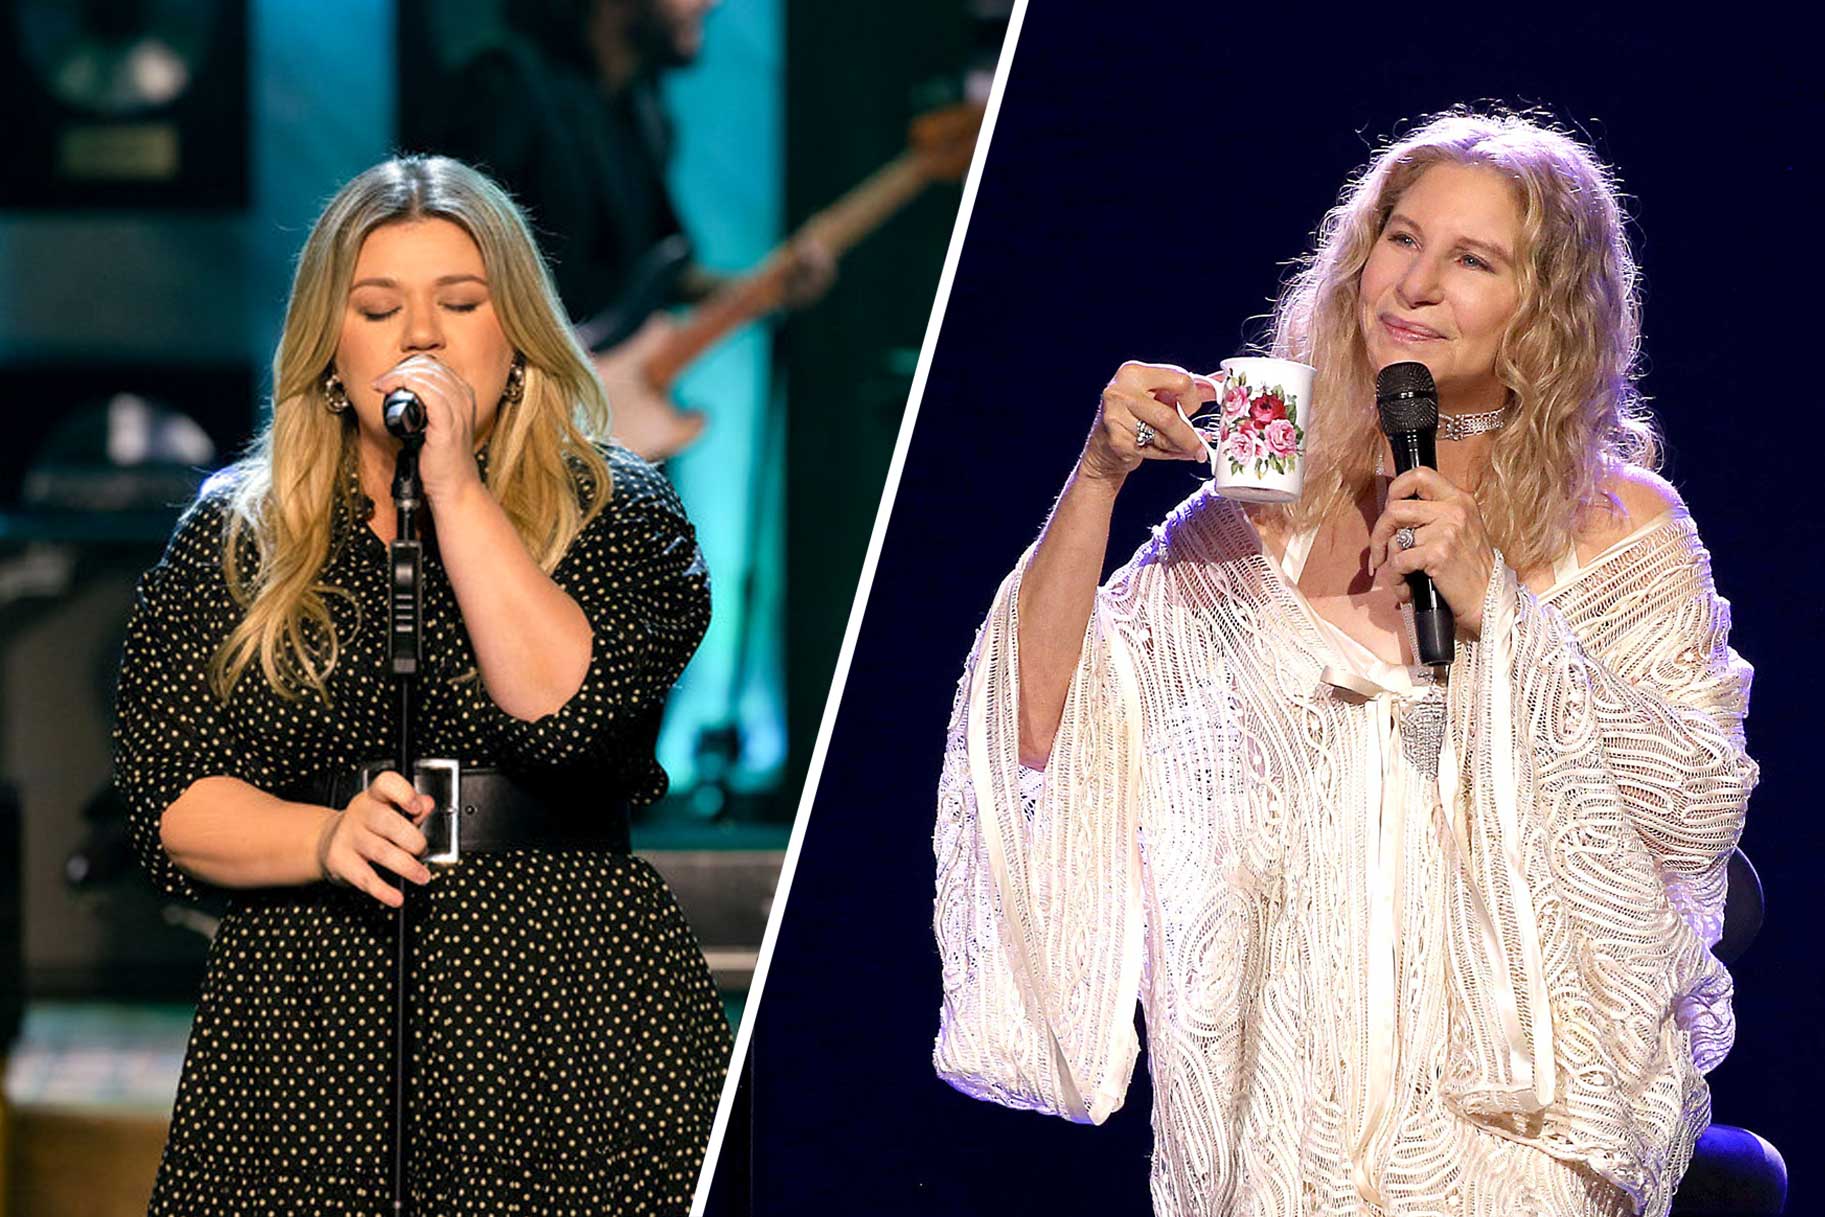 Split image of Kelly Clarkson and Barbara Streisand performing.